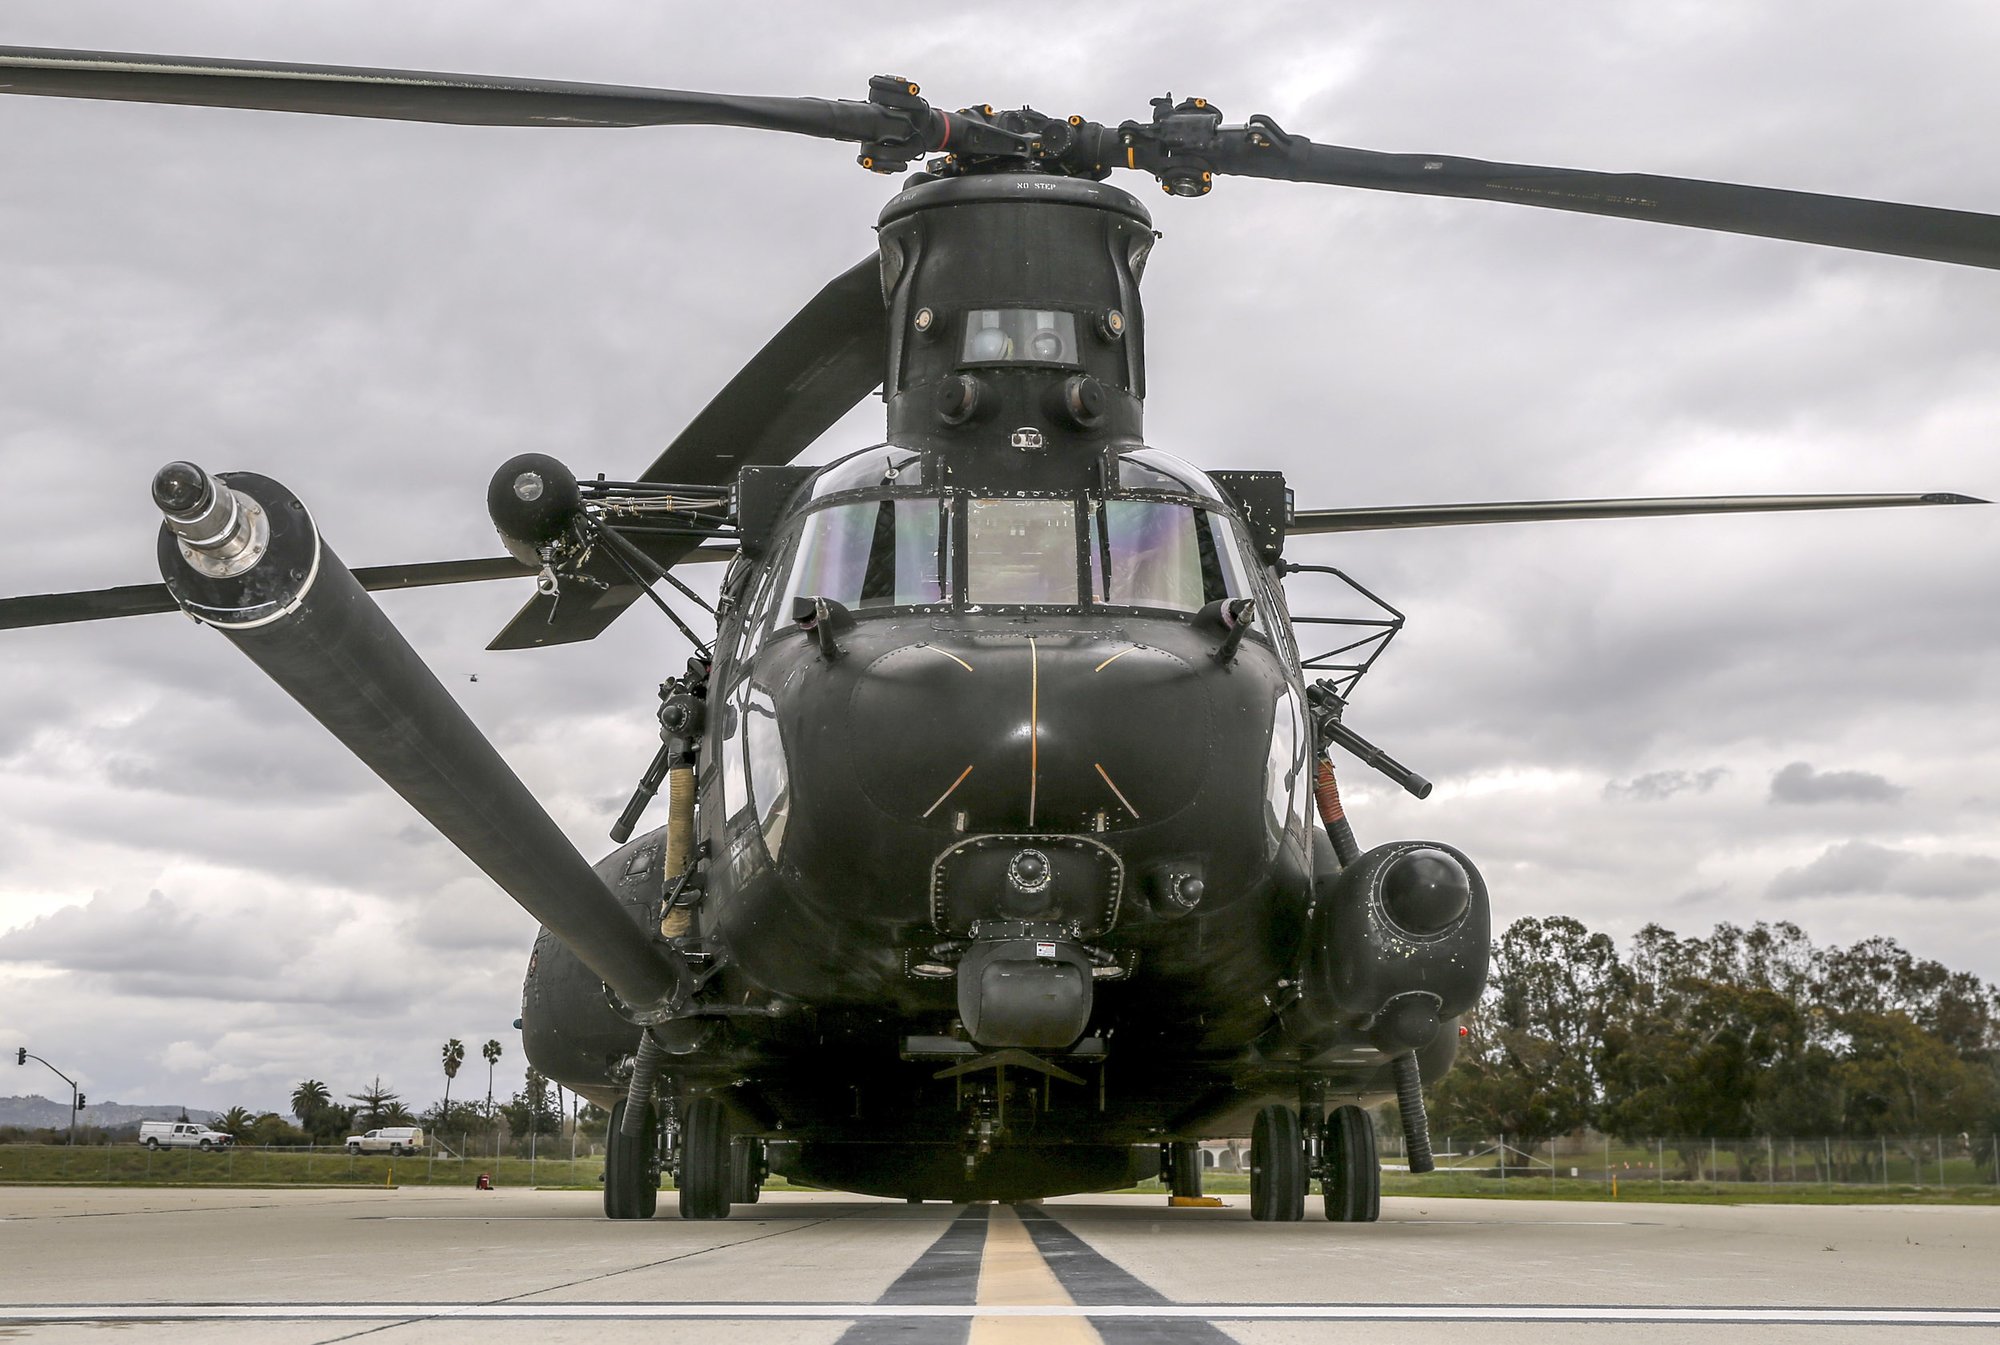 An MH-47 Chinook with the 160th Special Operations Aviation Regiment in 2019. US Marine Corps photo by Lance Cpl. Drake Nickels.